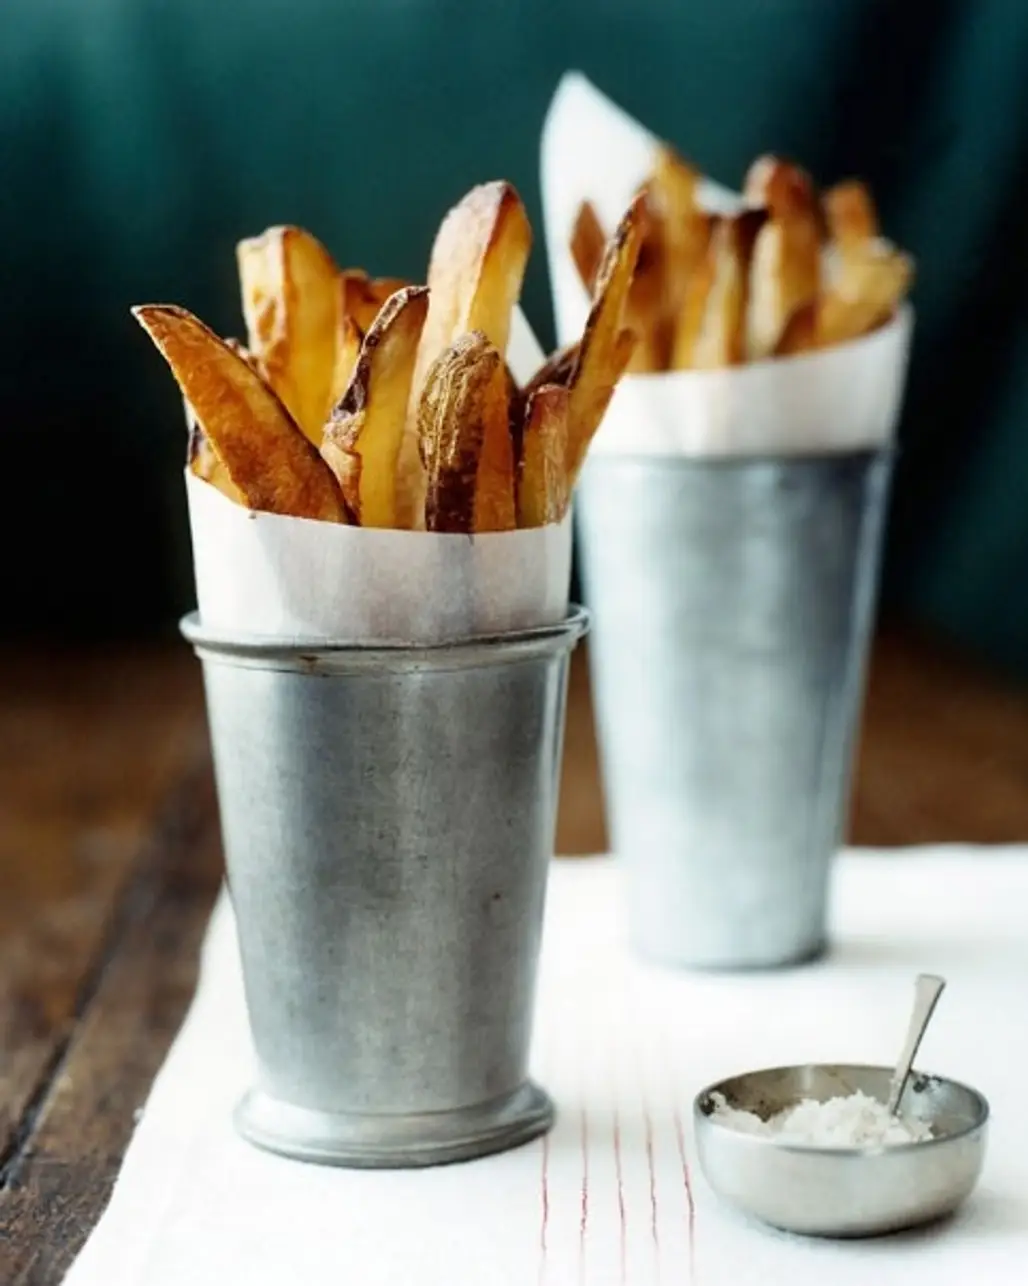 Oven Baked French Fries Variation